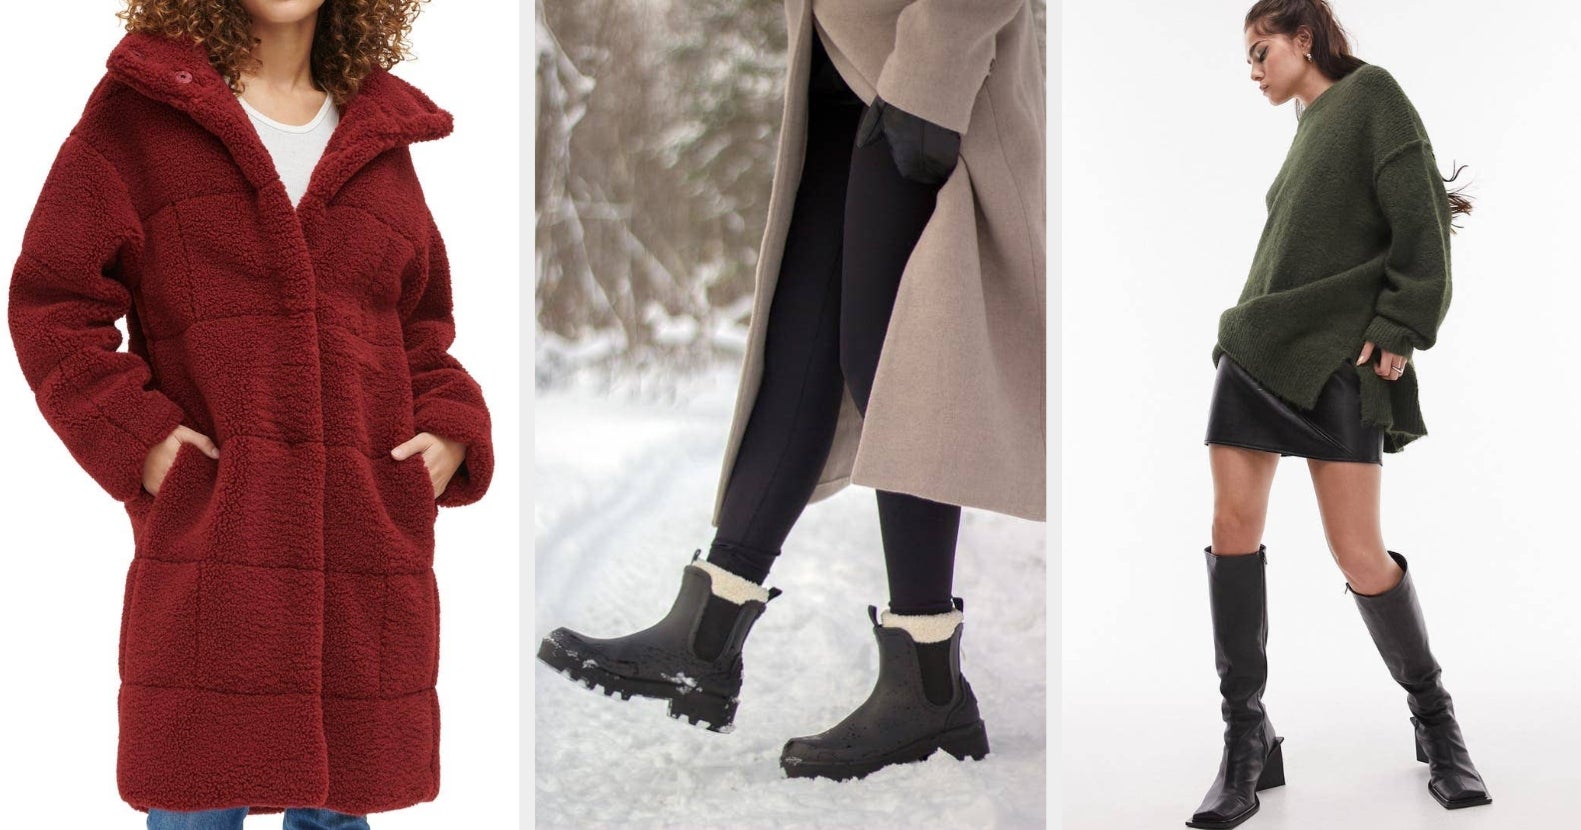 23 Cozy But Stylish Items Of Clothing You'll Never Want To Take Off